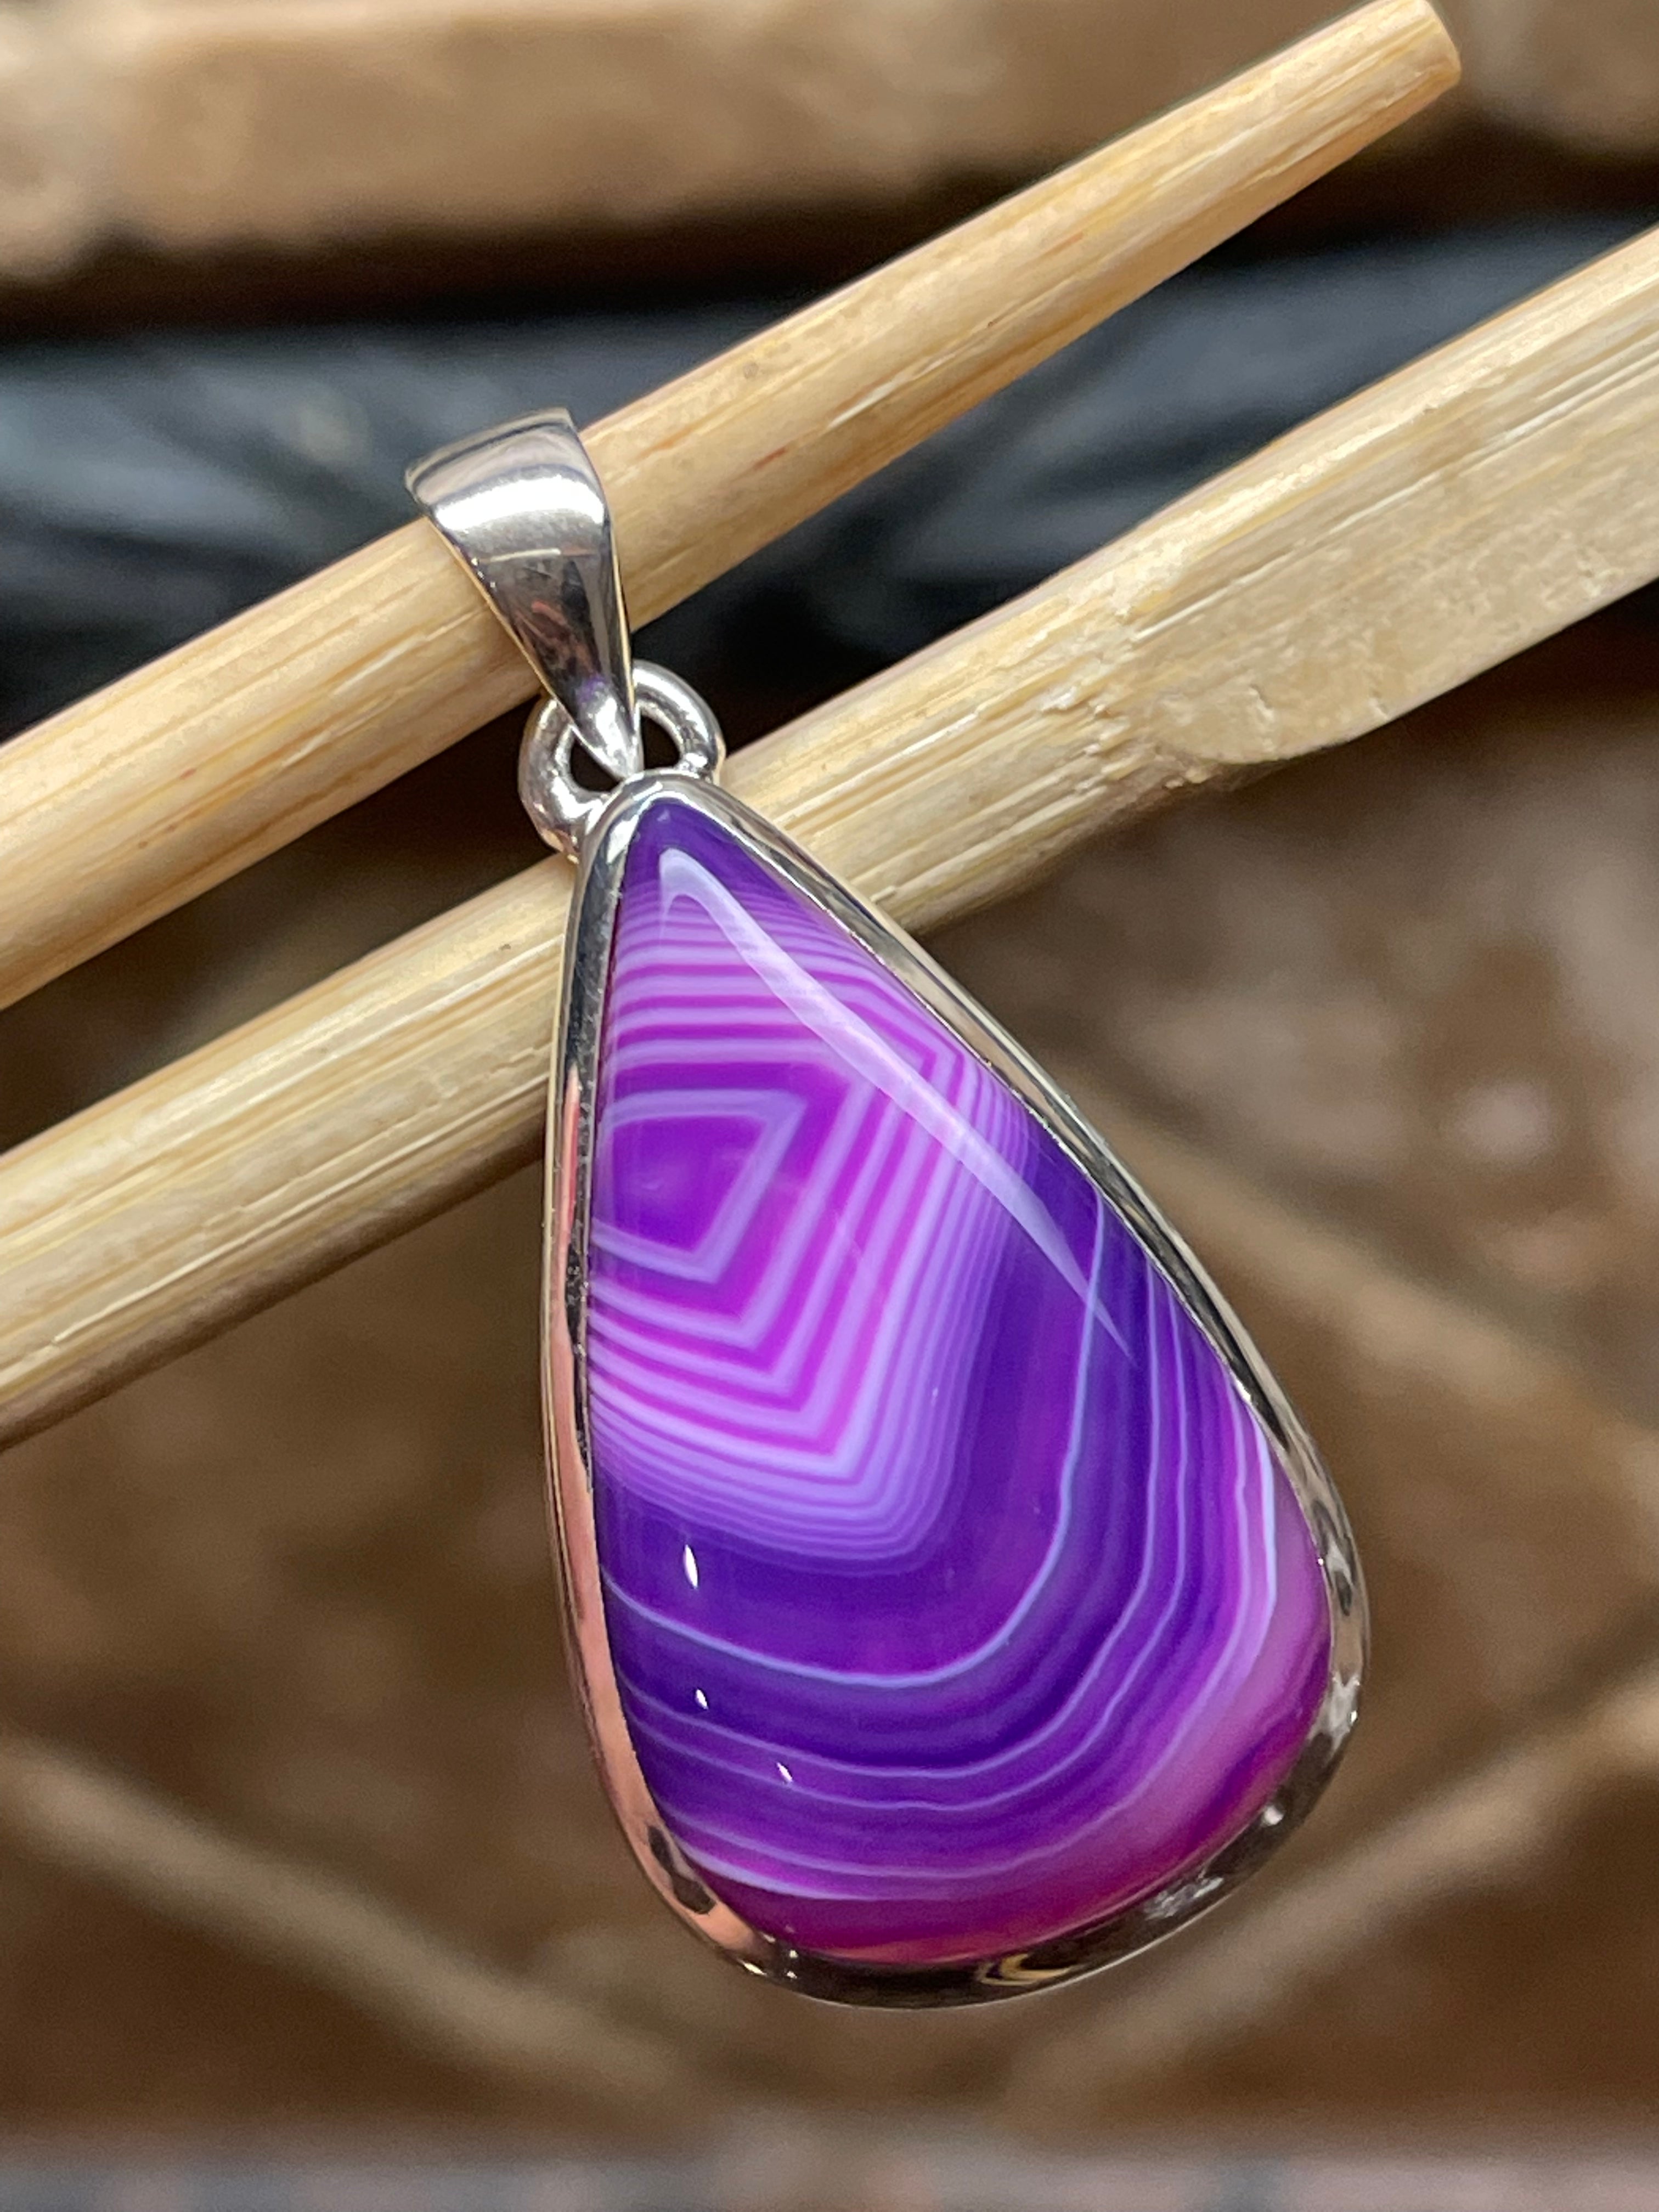 Genuine Pink Botswana Agate 925 Solid Sterling Silver Pendant 40mm - Natural Rocks by Kala